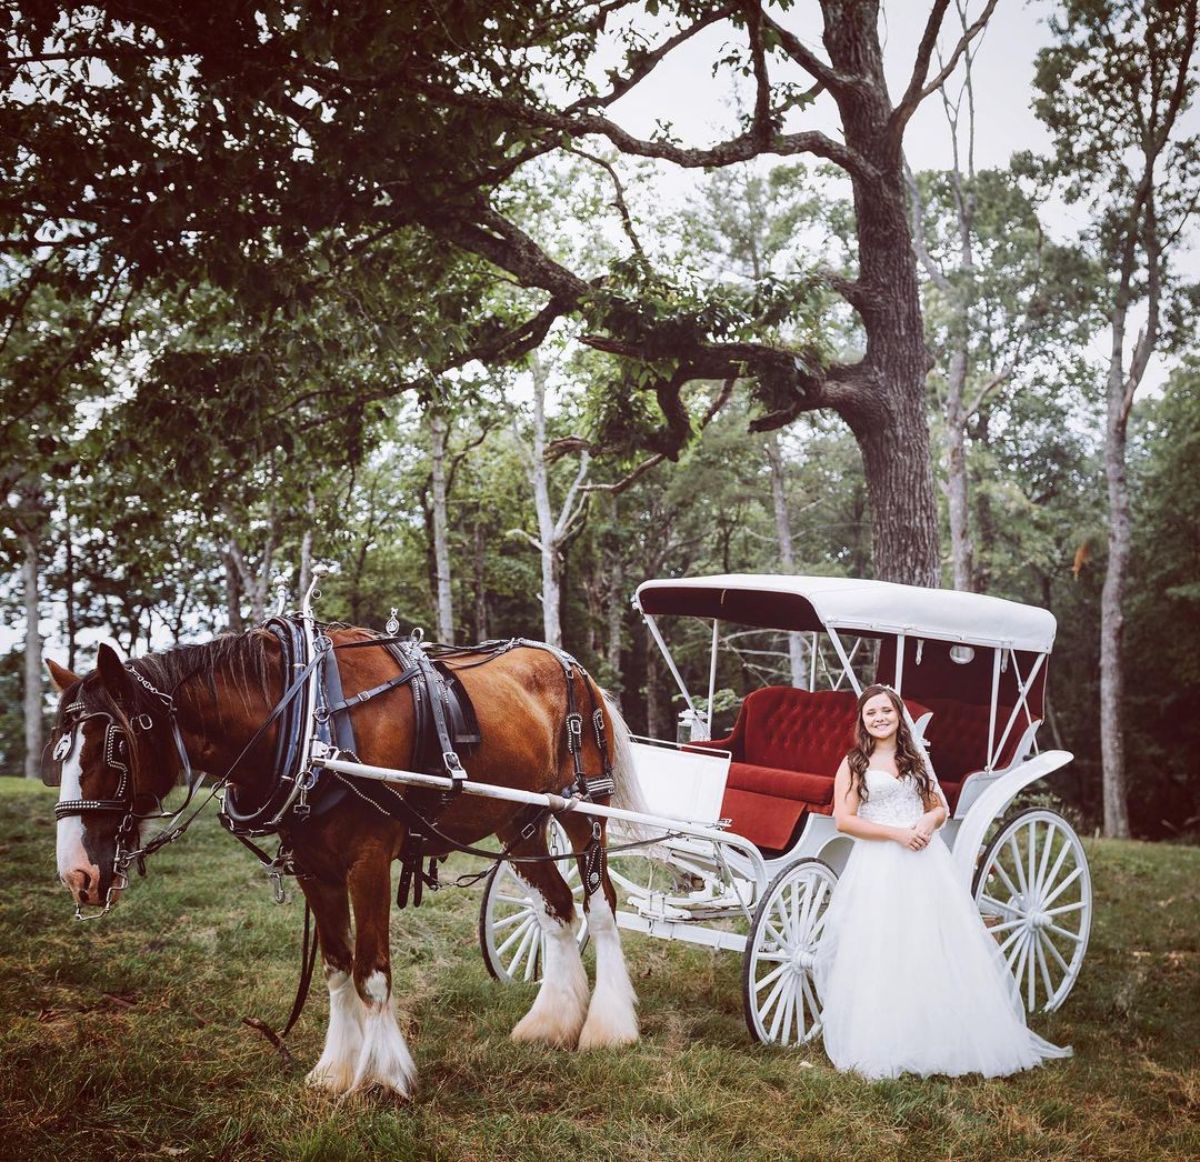 A bride stands near a white horse carriage drawn with a brown horse.